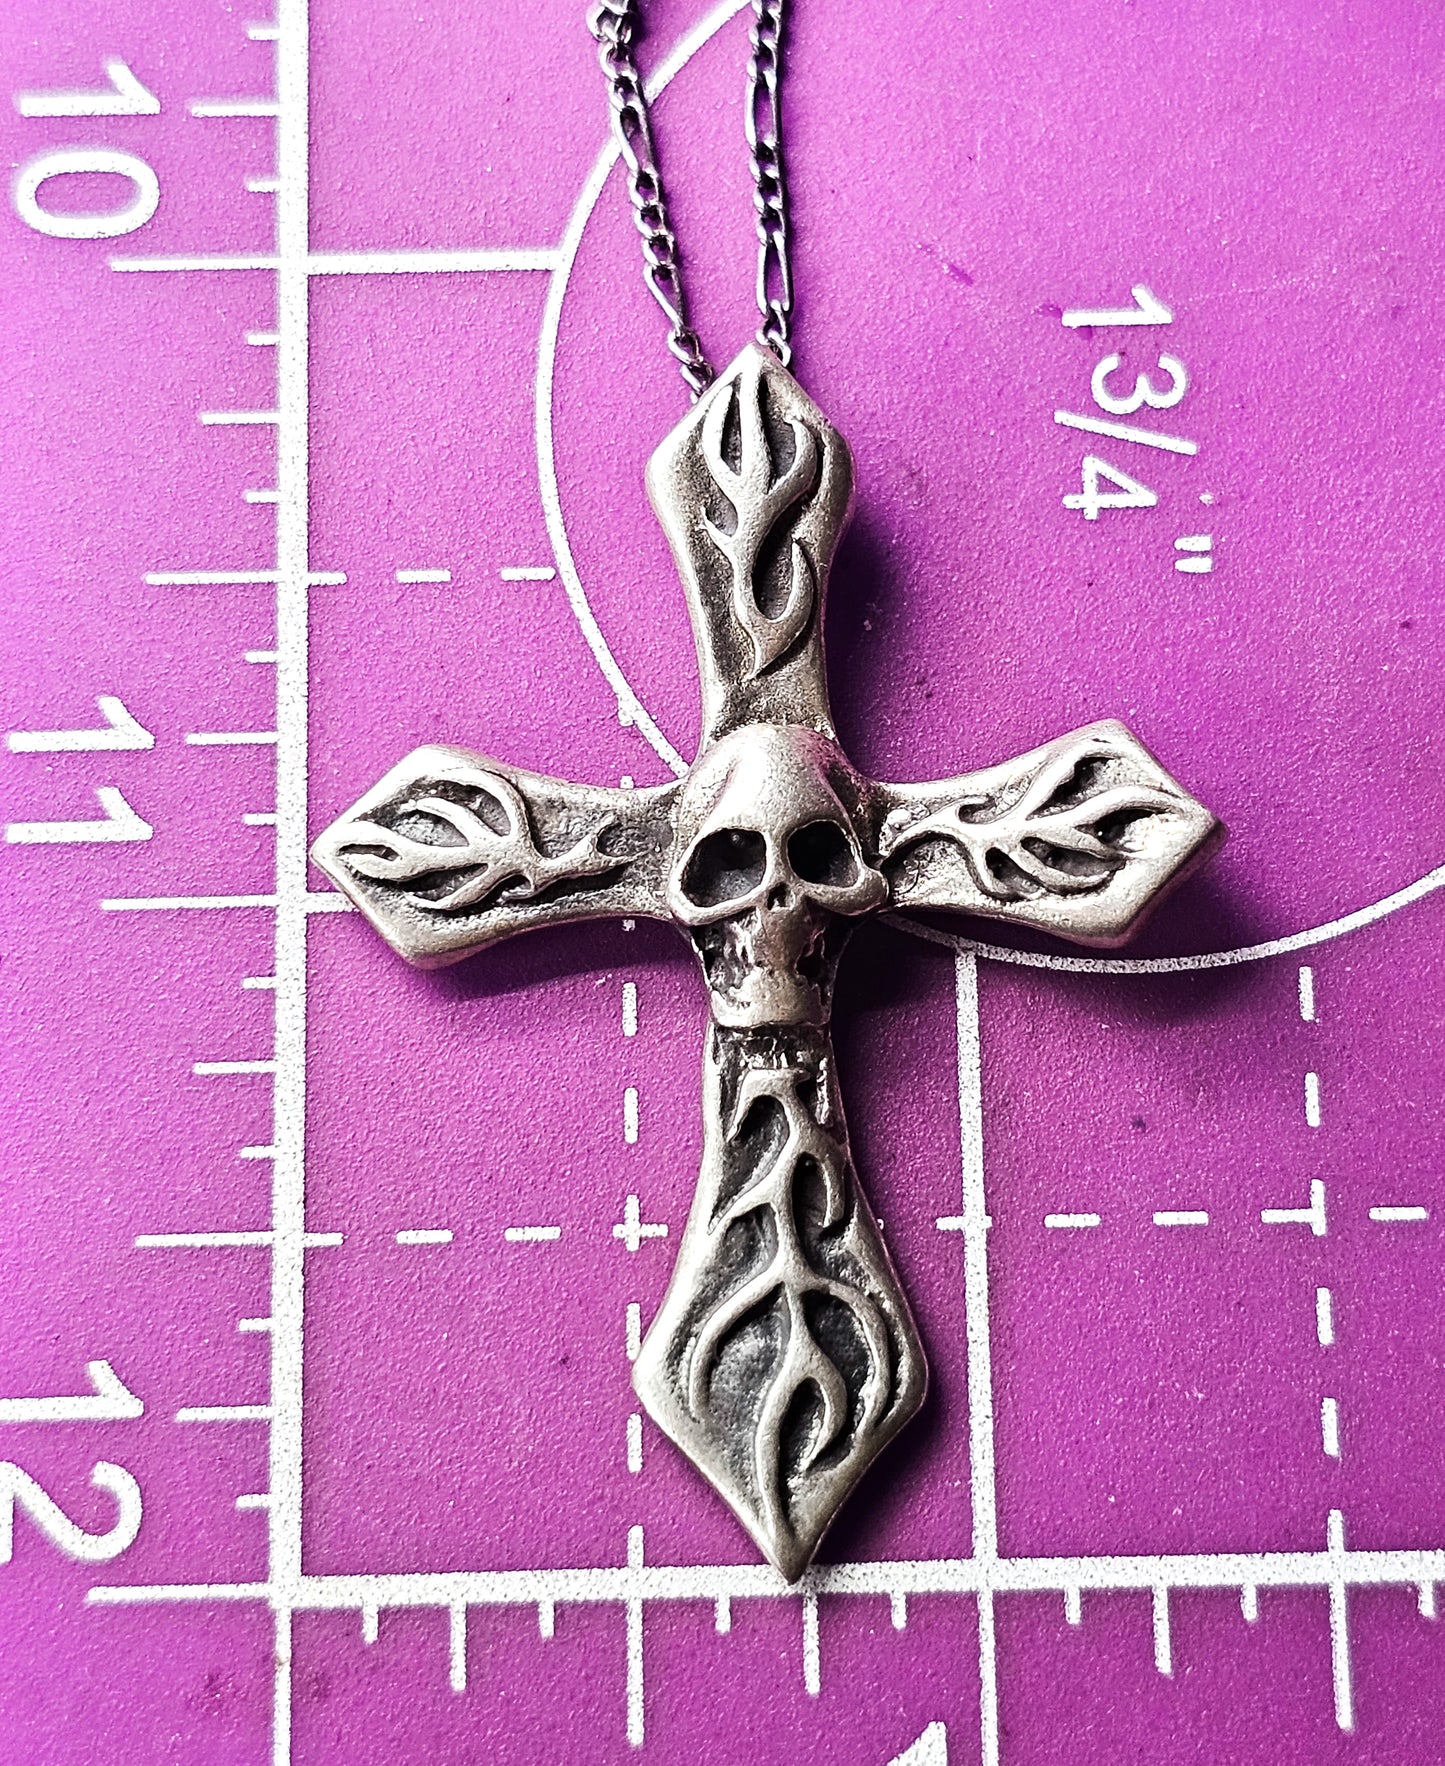 Flaming skull burning cross retro gothic vintage sterling silver pendant necklace